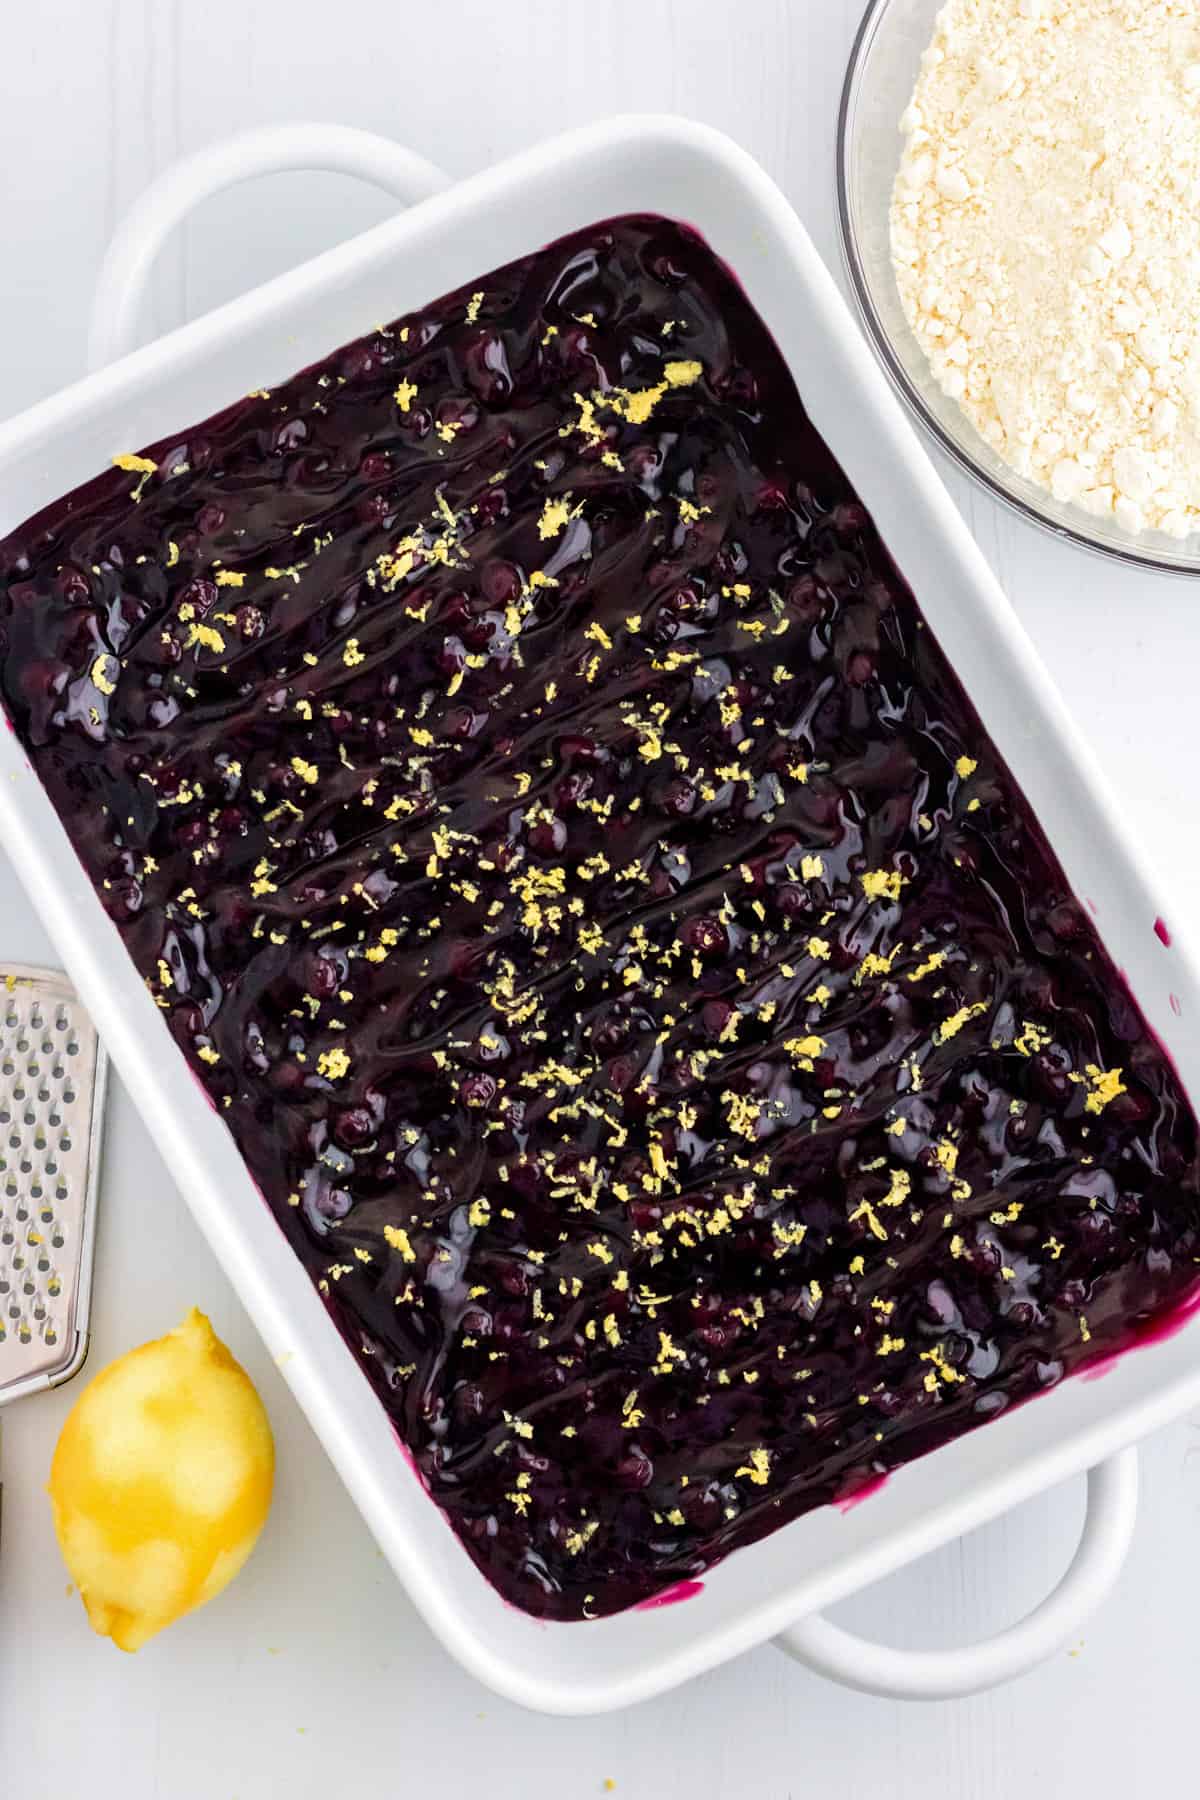 Blueberry pie filling topped with lemon zest in a white baking dish.